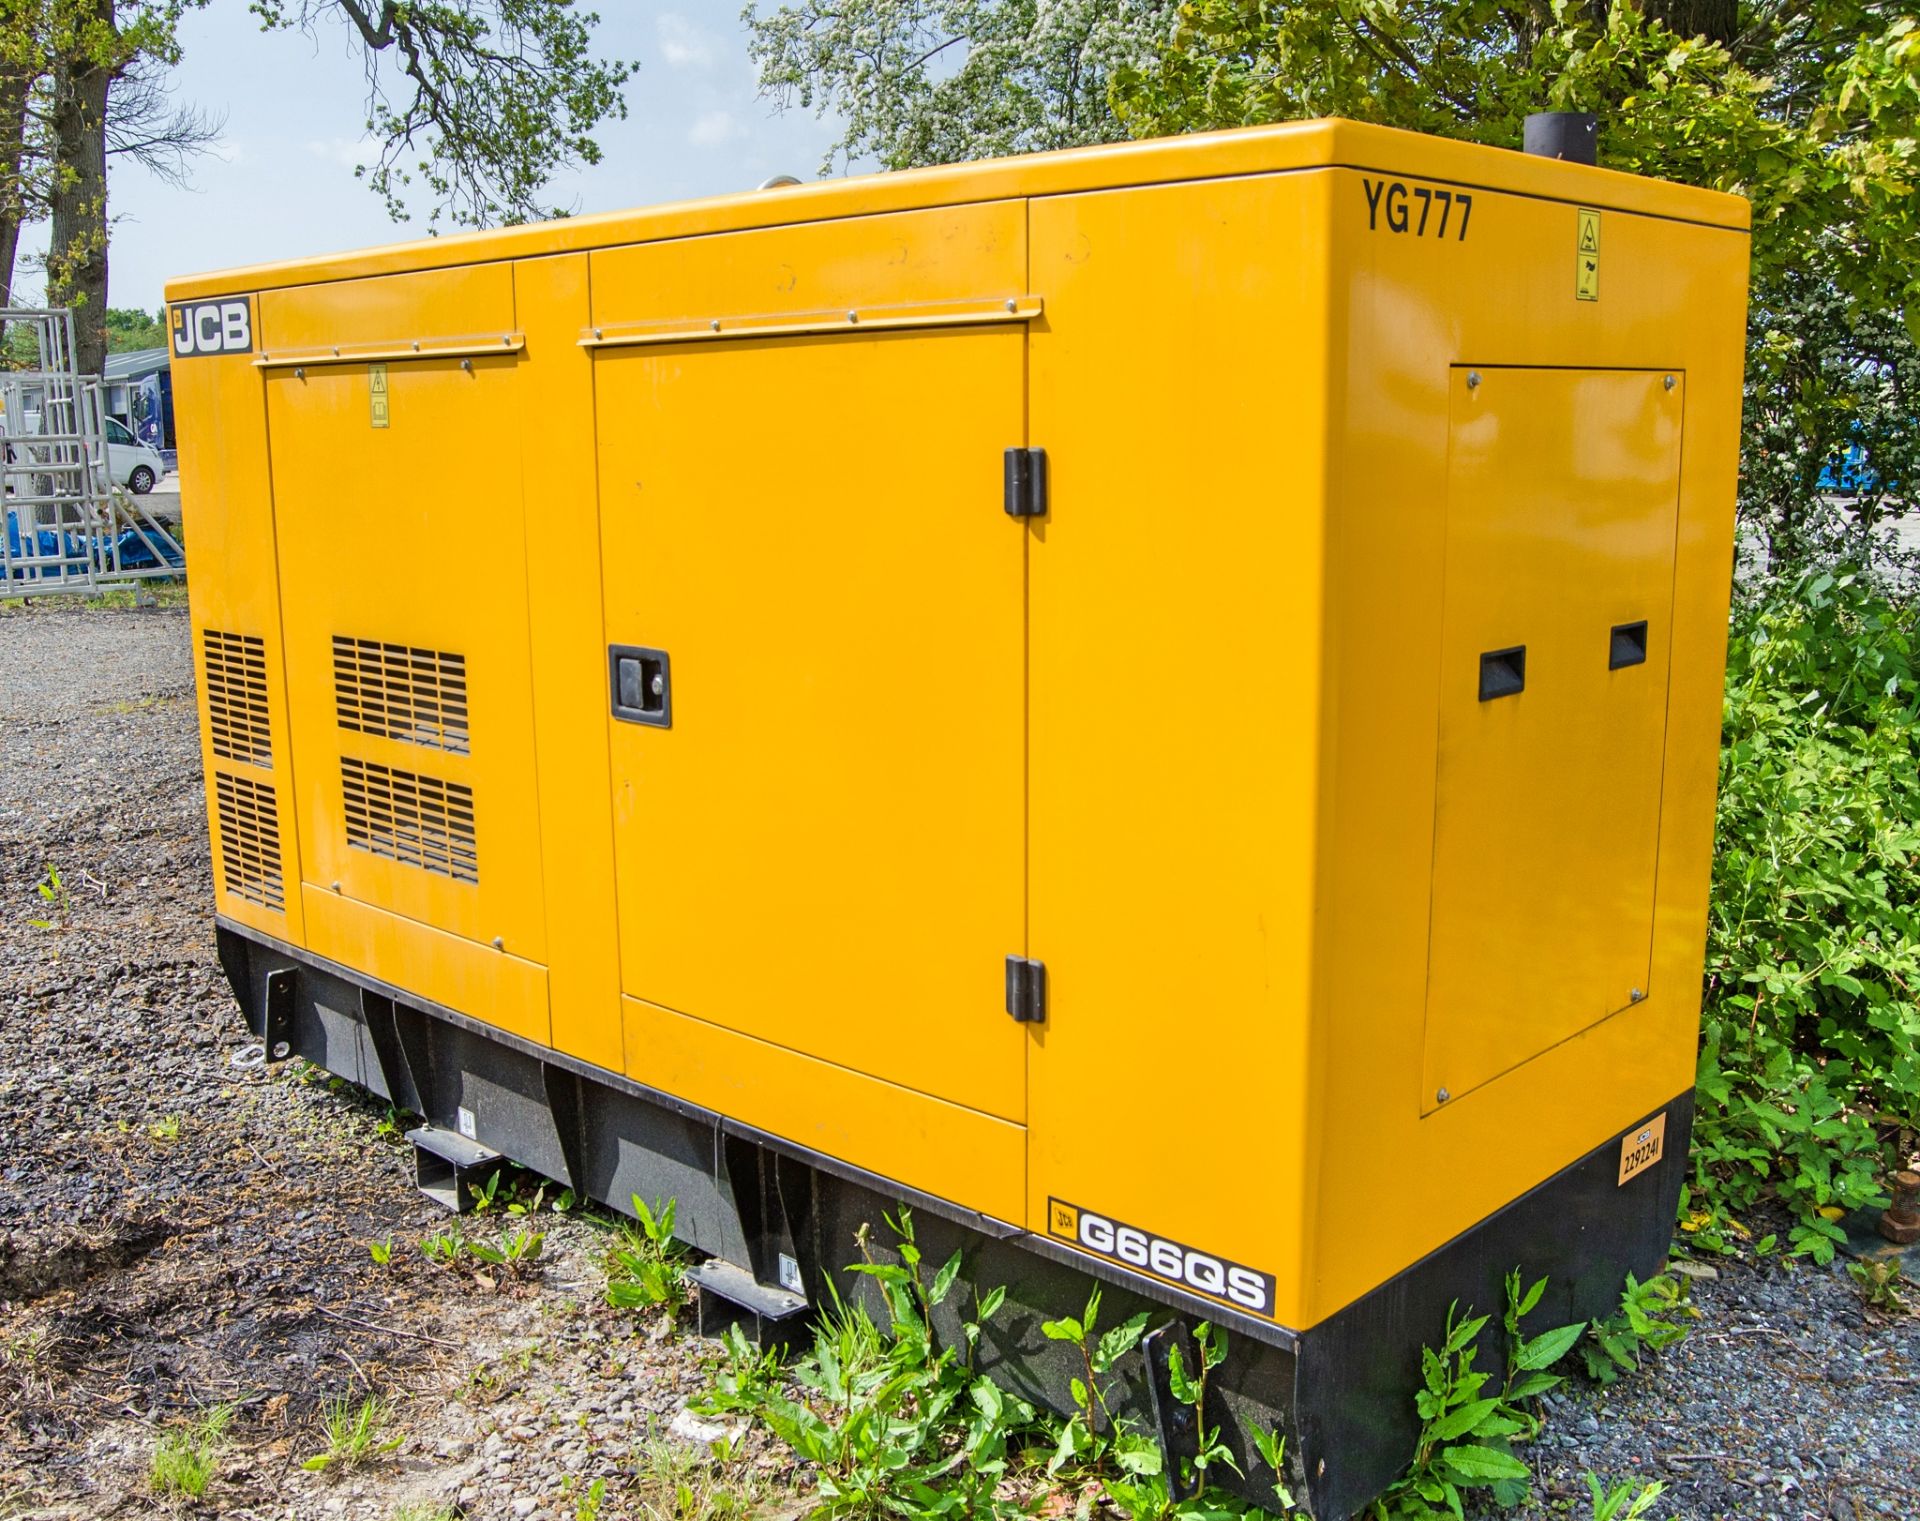 JCB 66QS 60 kva diesel driven generator Year: 2017 S/N: 2292241 Recorded hours: 12285 YG777 - Image 2 of 7